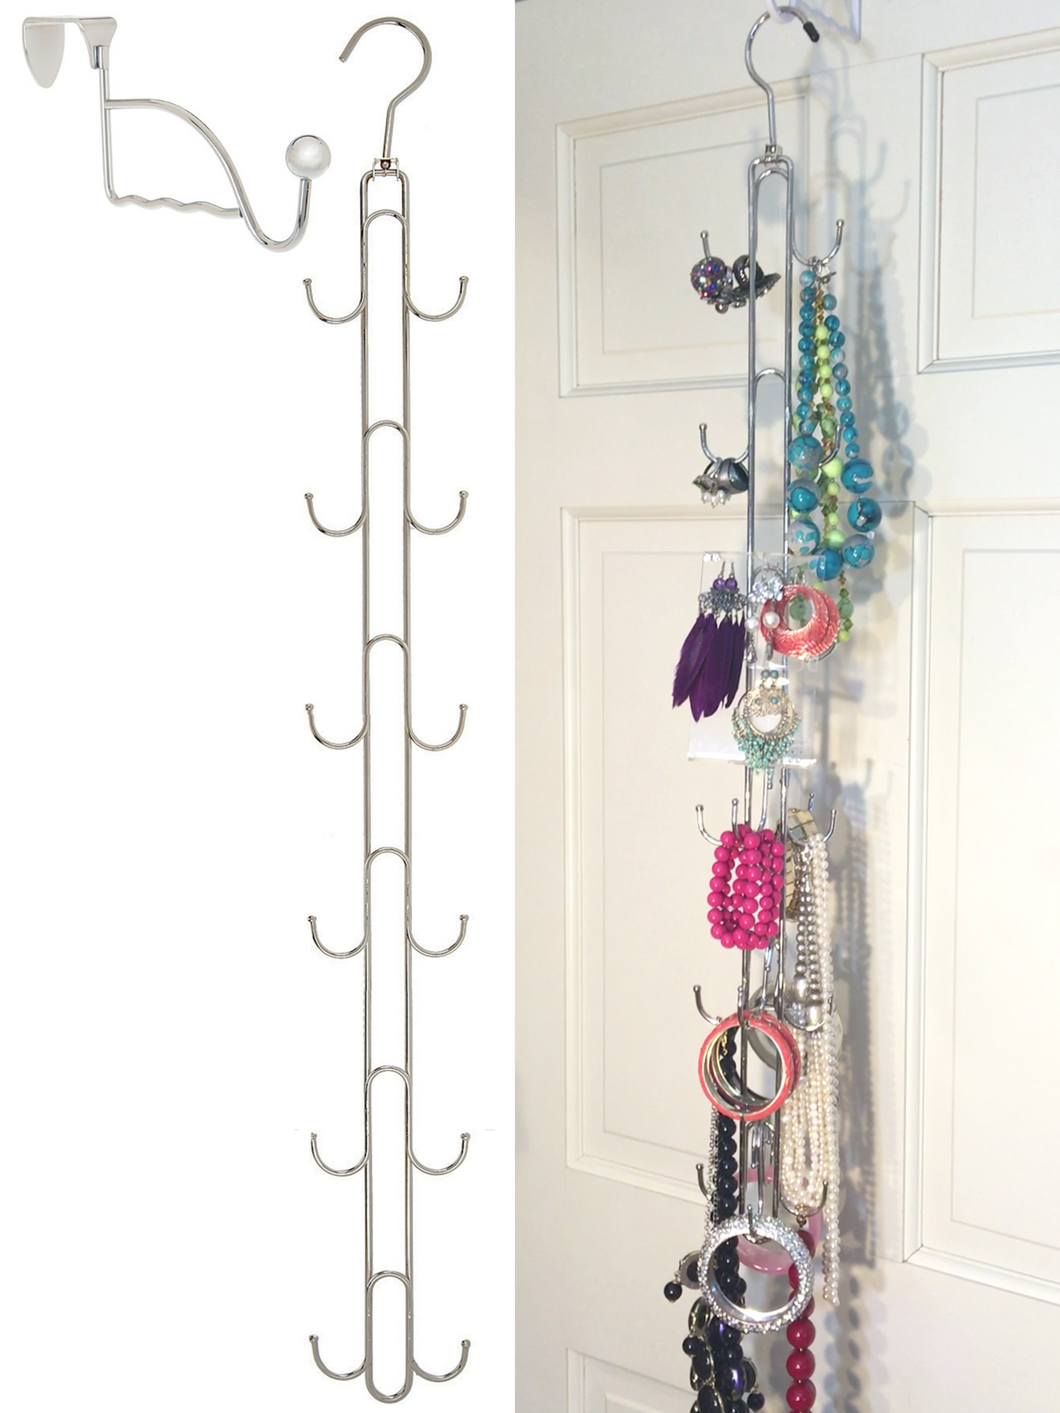 Jewelry Stax™ - Rotating Over the Door Hanging Jewelry Organizer - Boottique